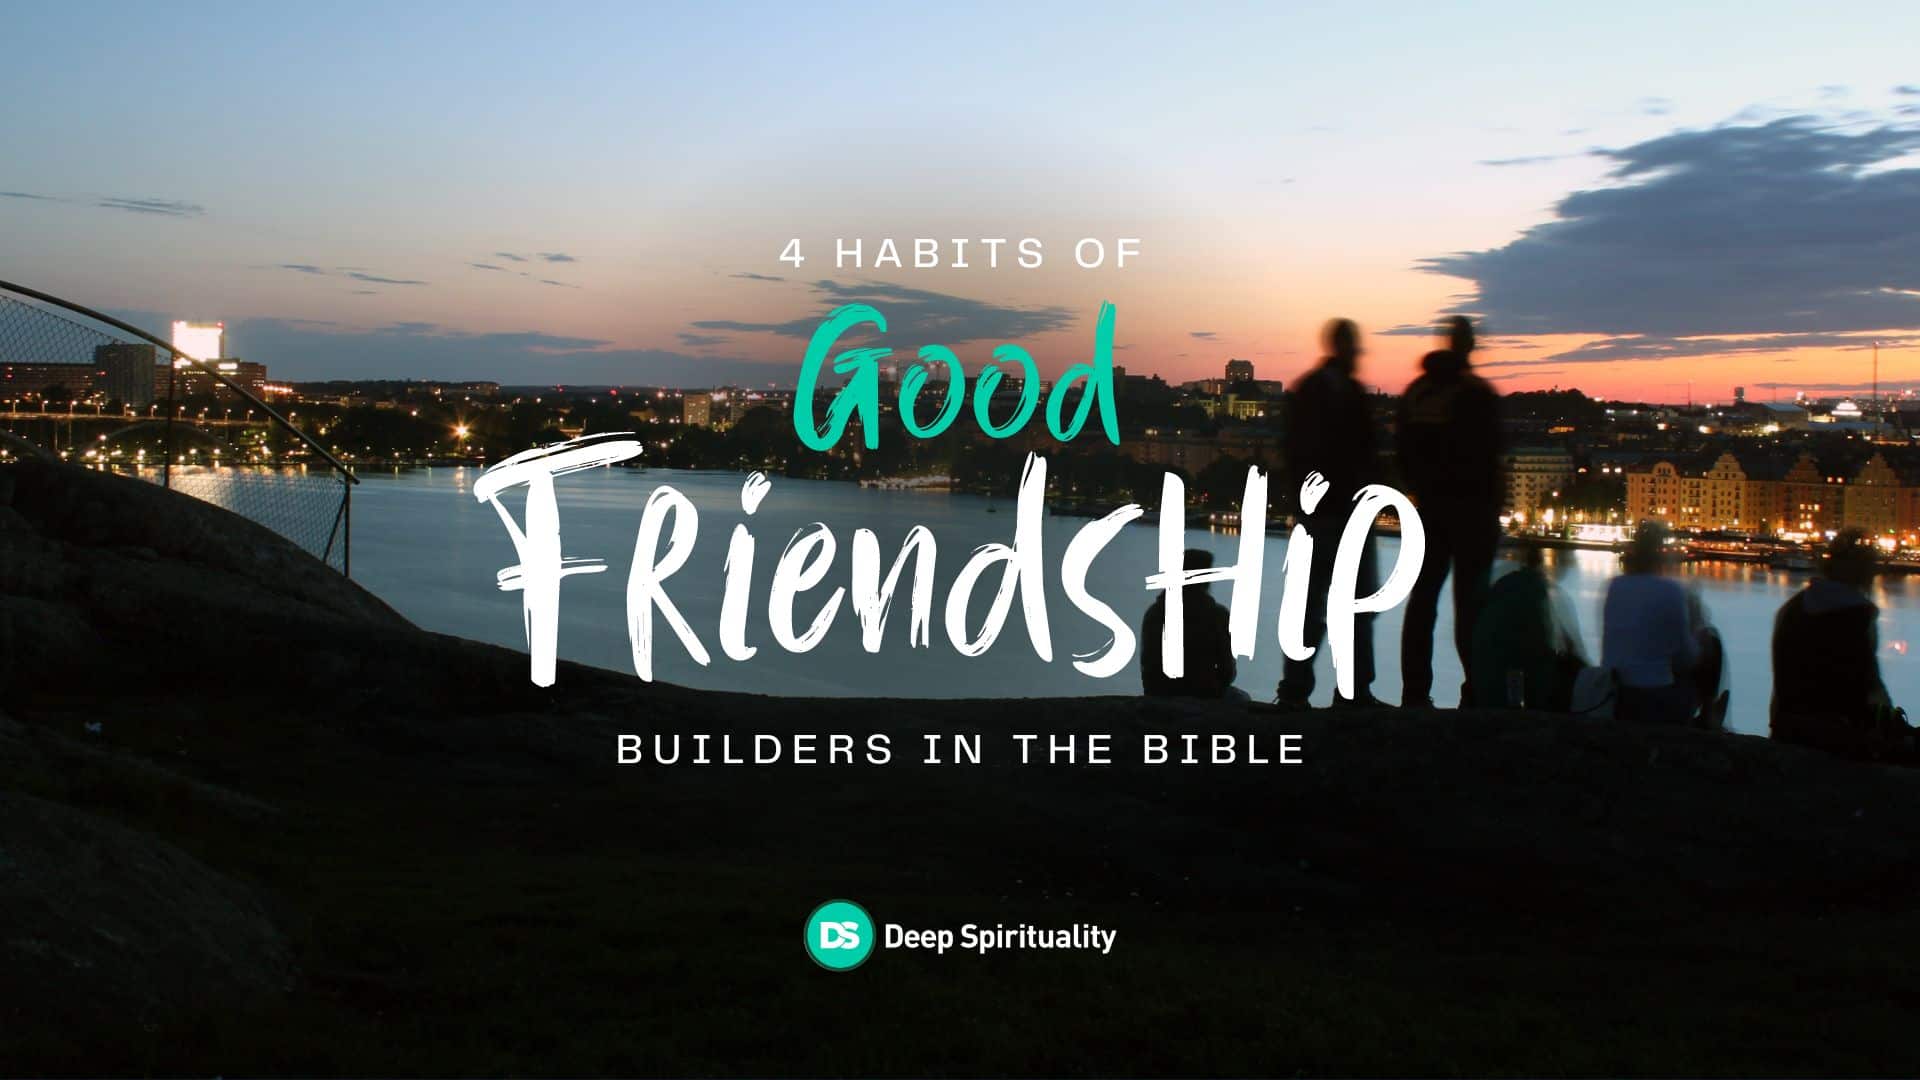 4 Habits to Build if You Want Good Friendships, According to the Bible 62